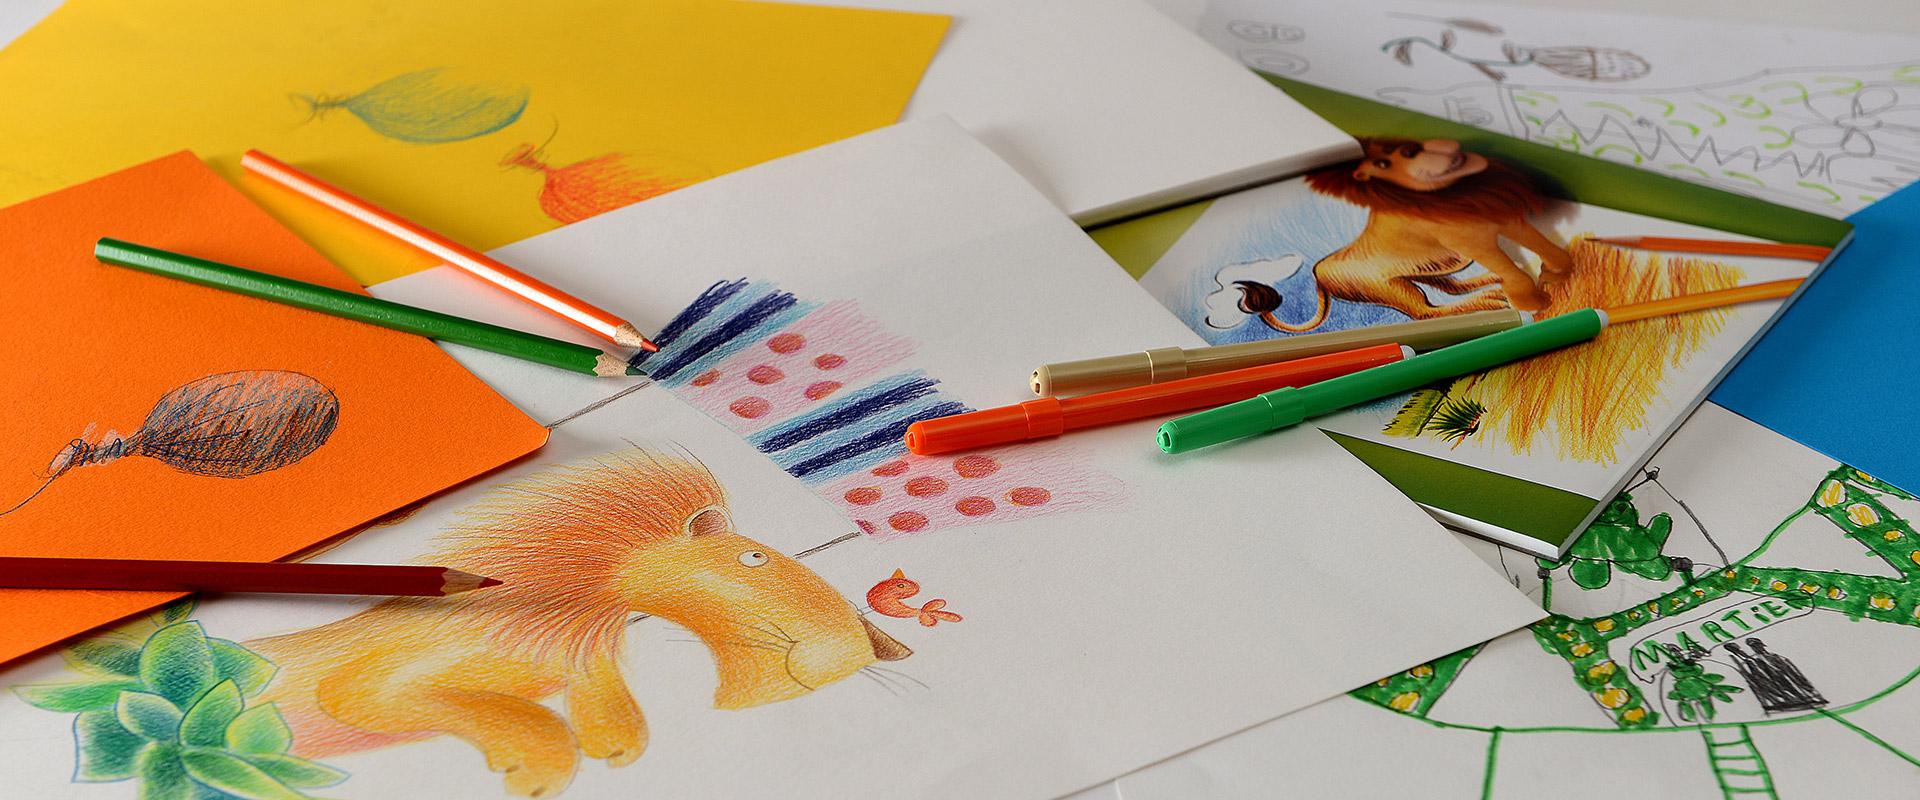 Artistic Blog - learn how to draw with colored pencils: How to draw flowers  with colored pencils - a step by step tutorial